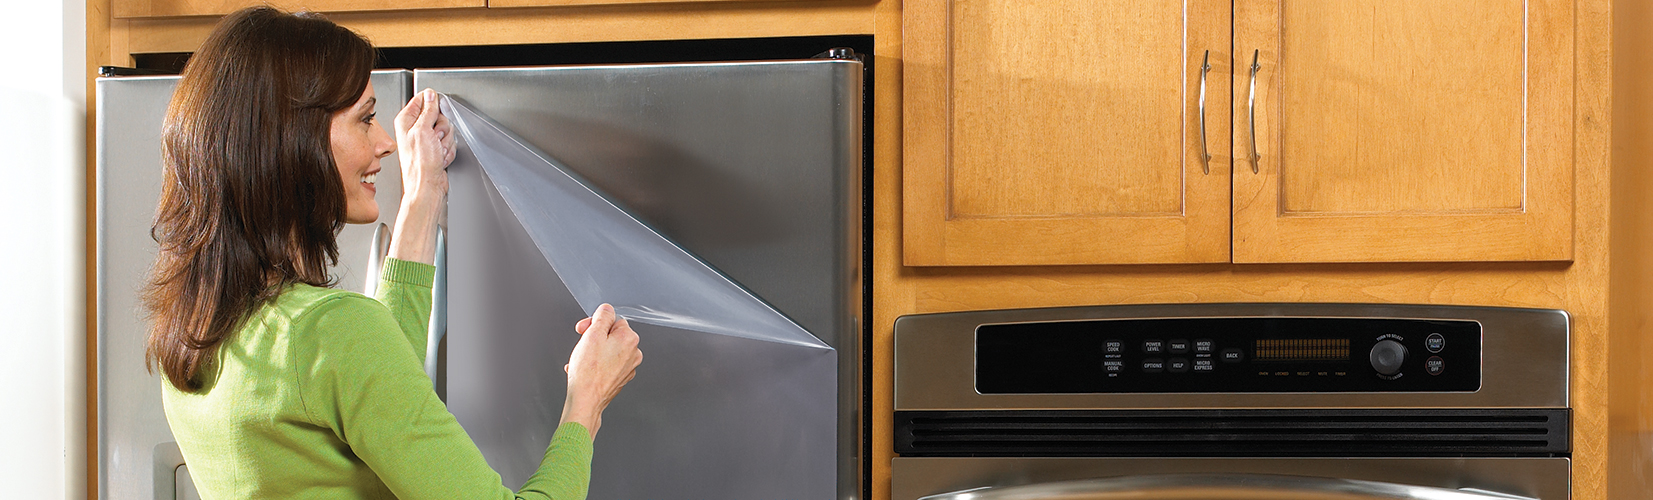 Lady removes surface protection film on new gray metallic colored refrigerator